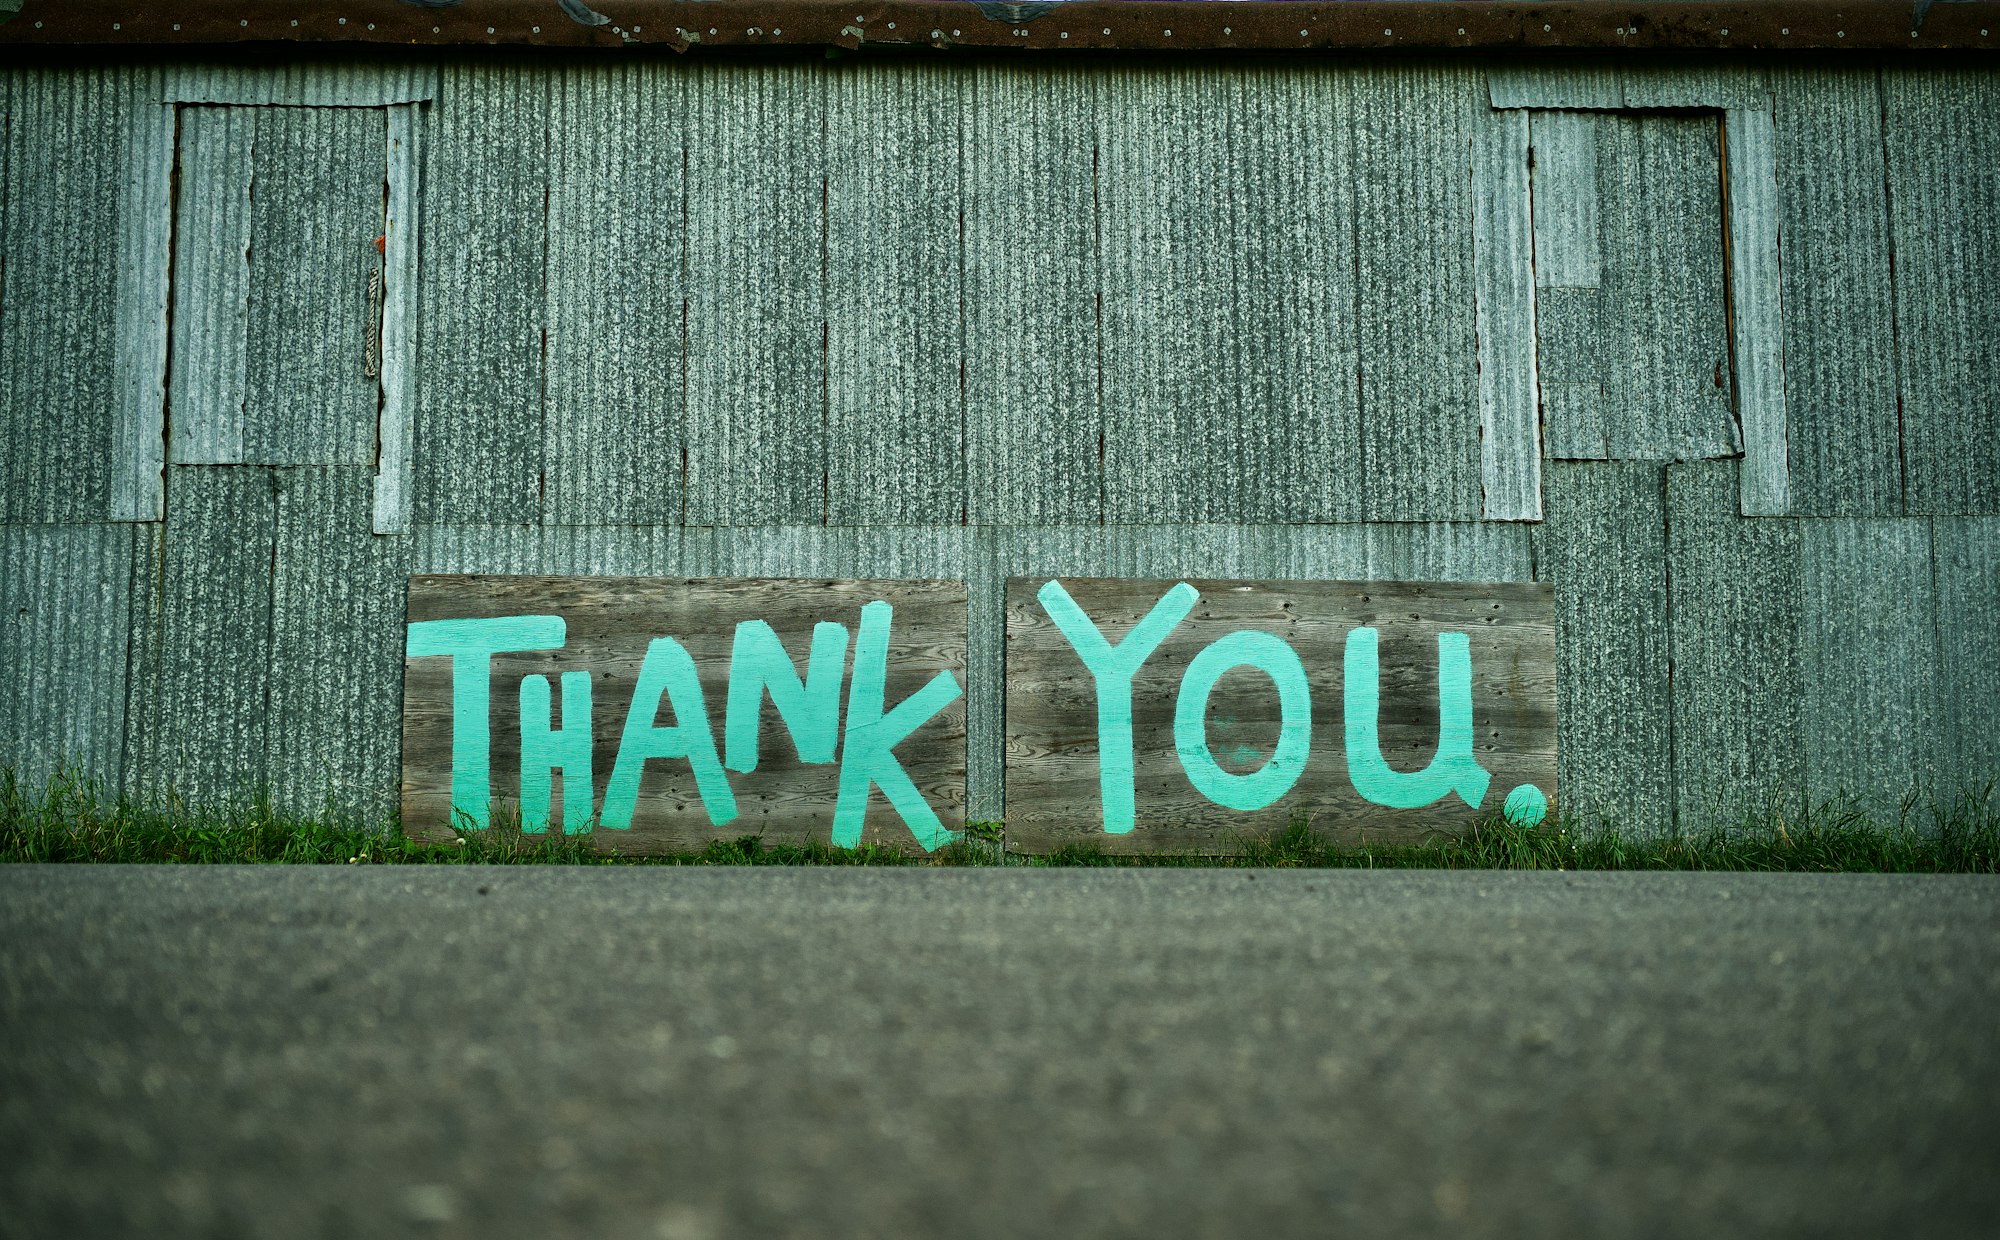 Metal sided building with Thank You painted on the side in blue paint.